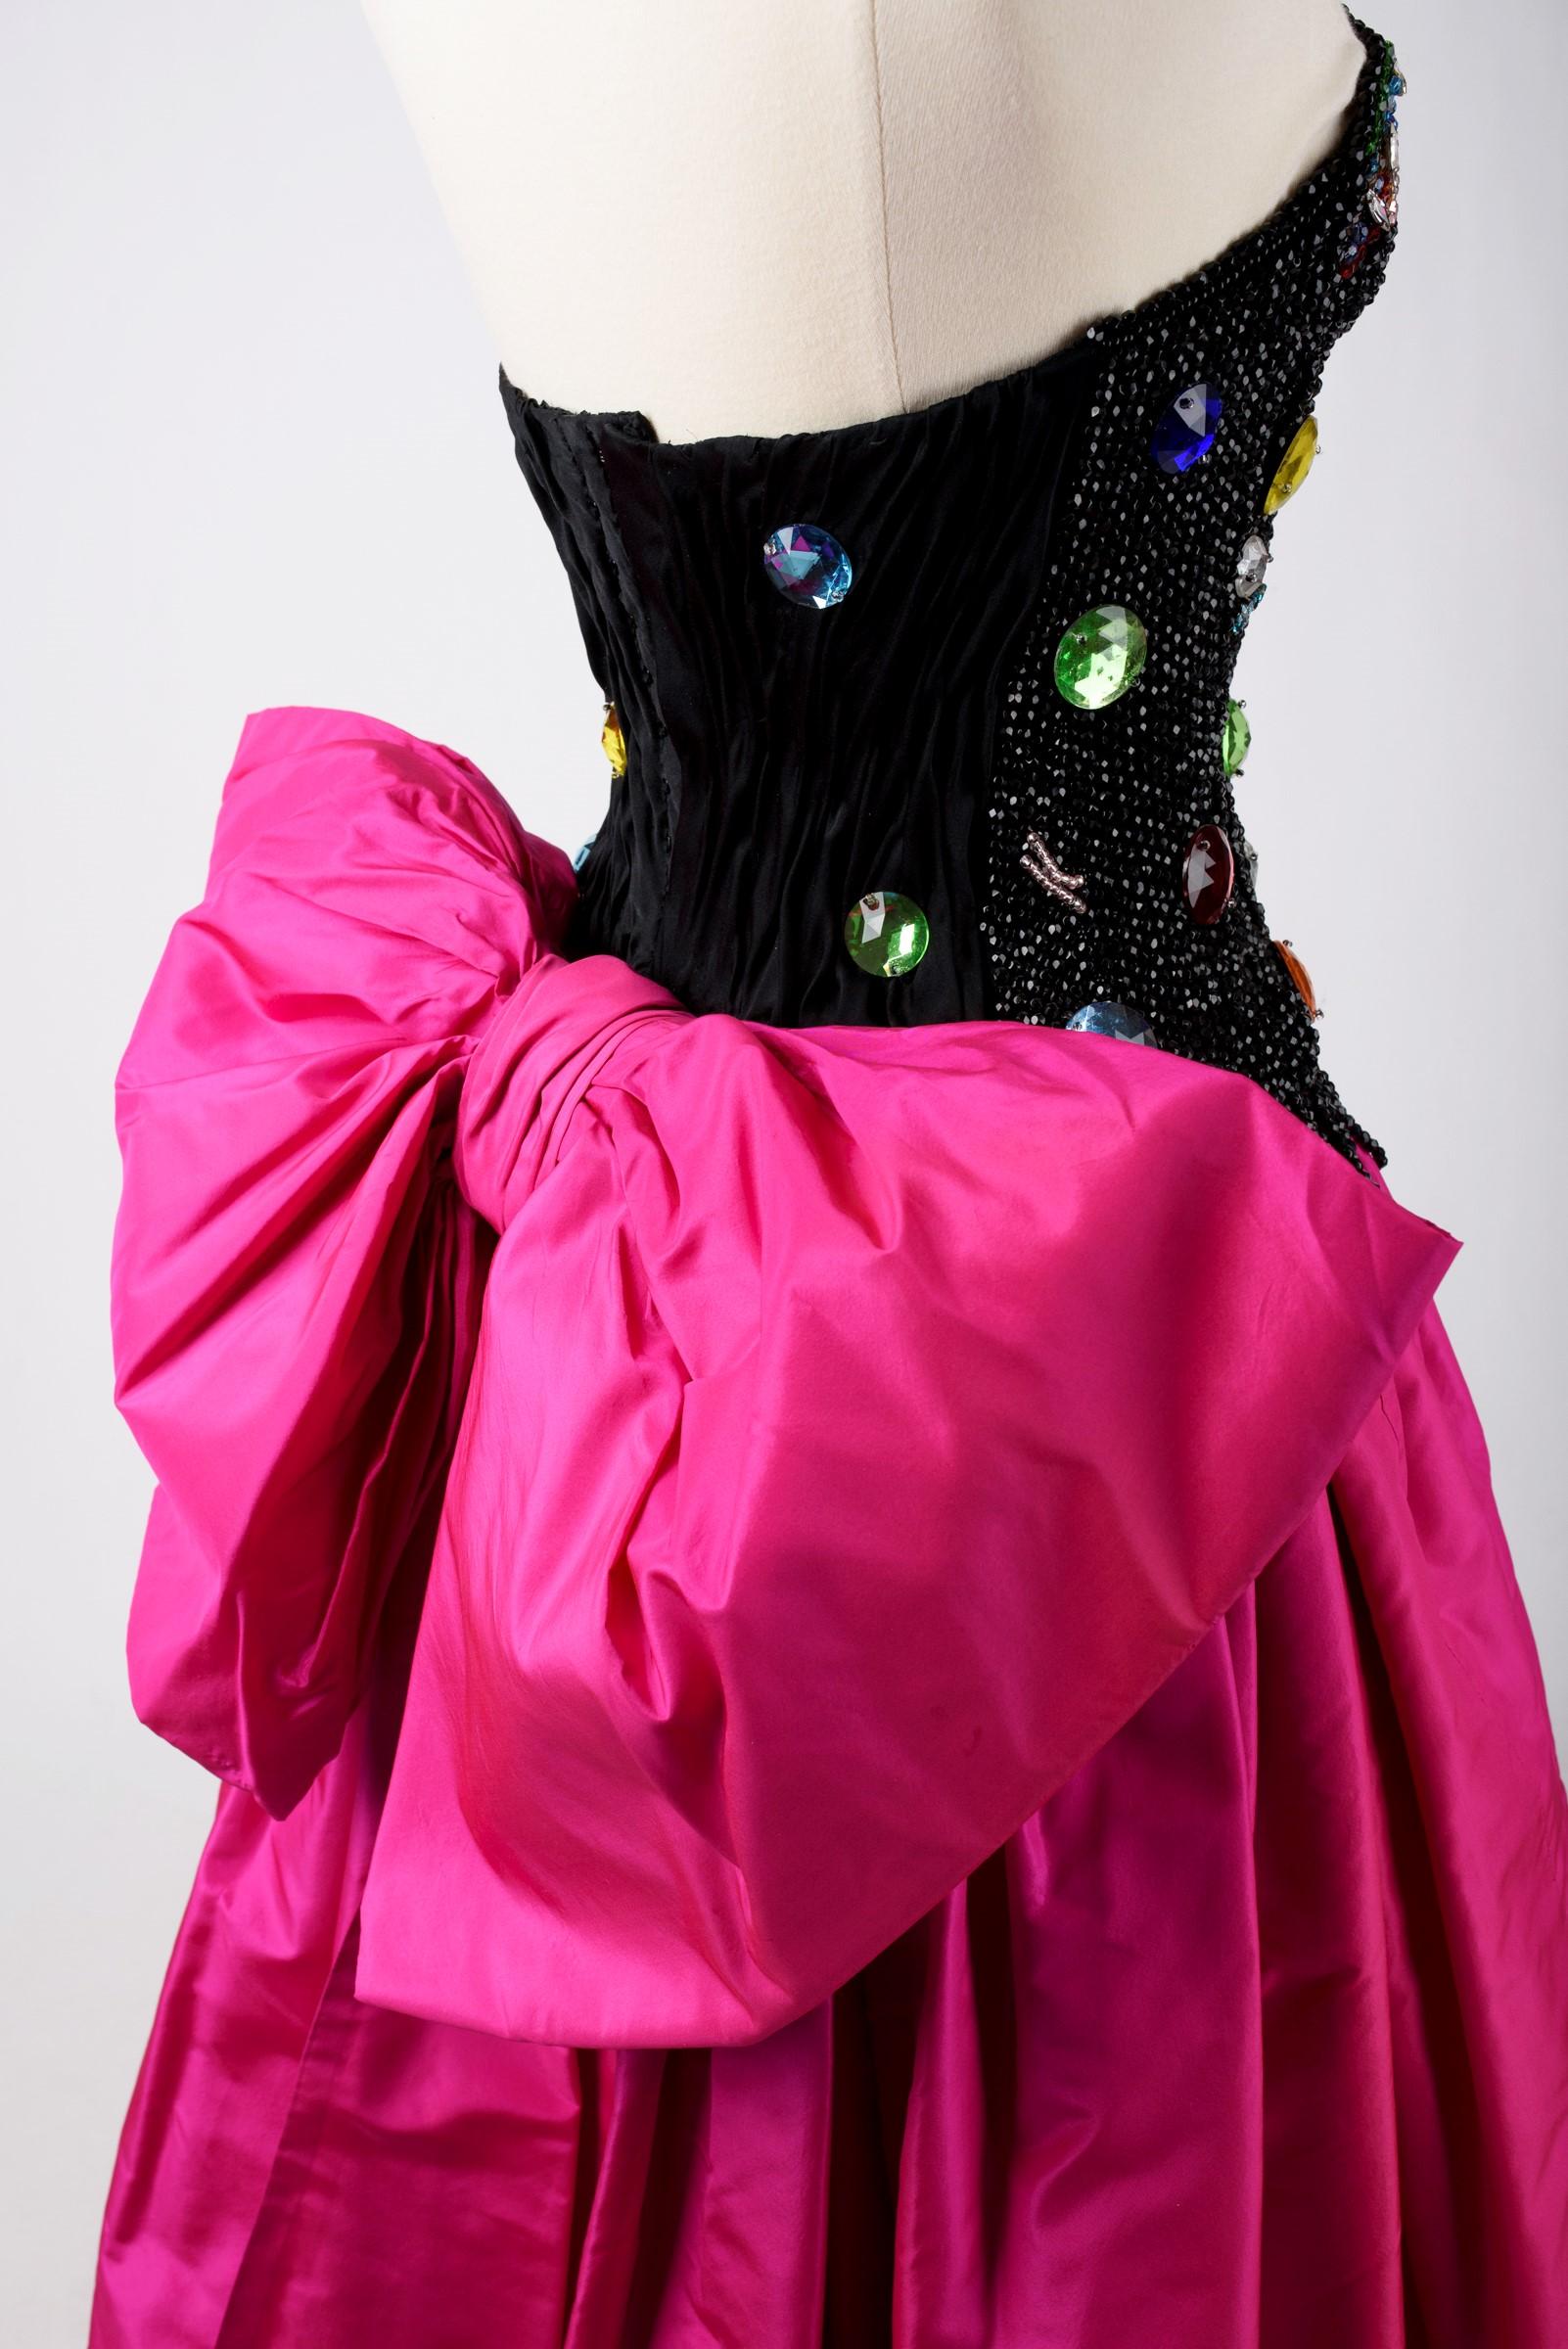 A Louis Féraud Couture Taffeta Evening Dress with beaded Bodice-Fall 1986-1987 For Sale 6